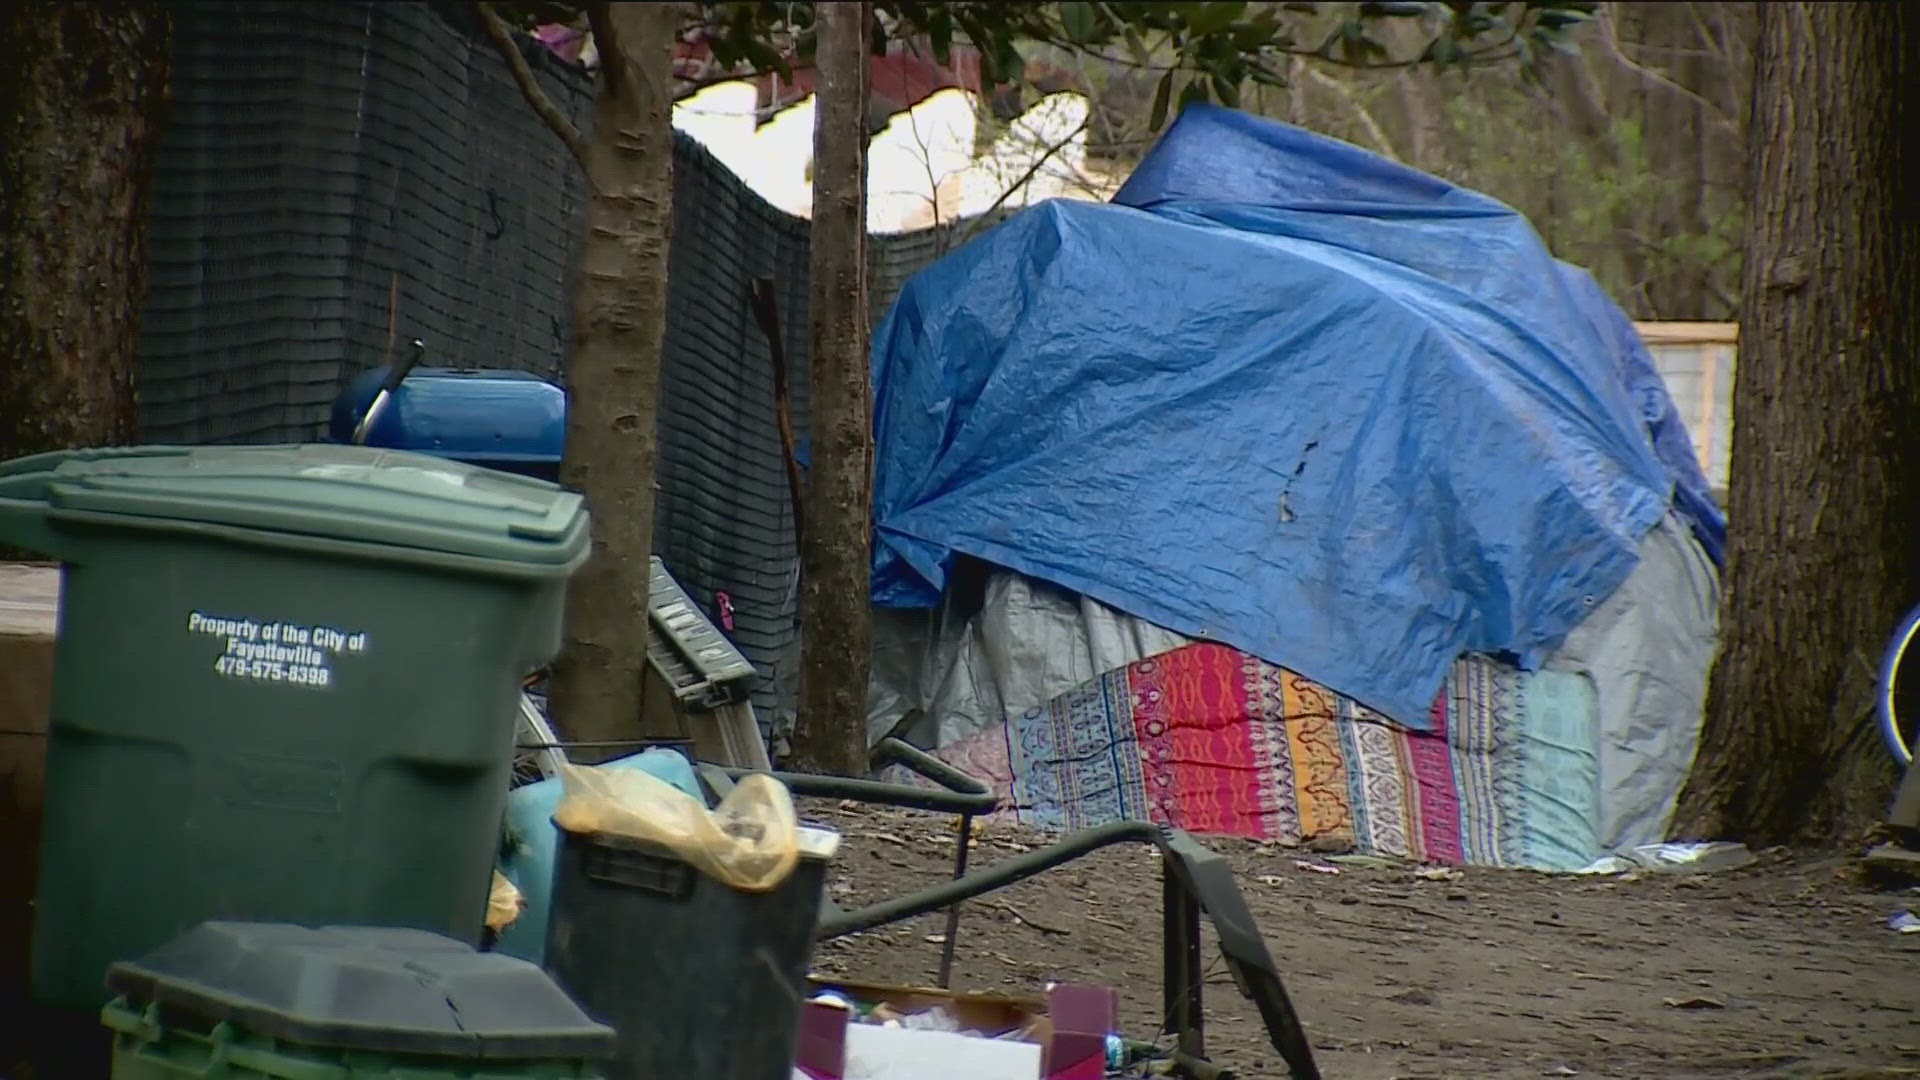 The Supreme Court allowed cities to enforce bans on the unhoused population sleeping outside Friday, local officials share insight on the population.